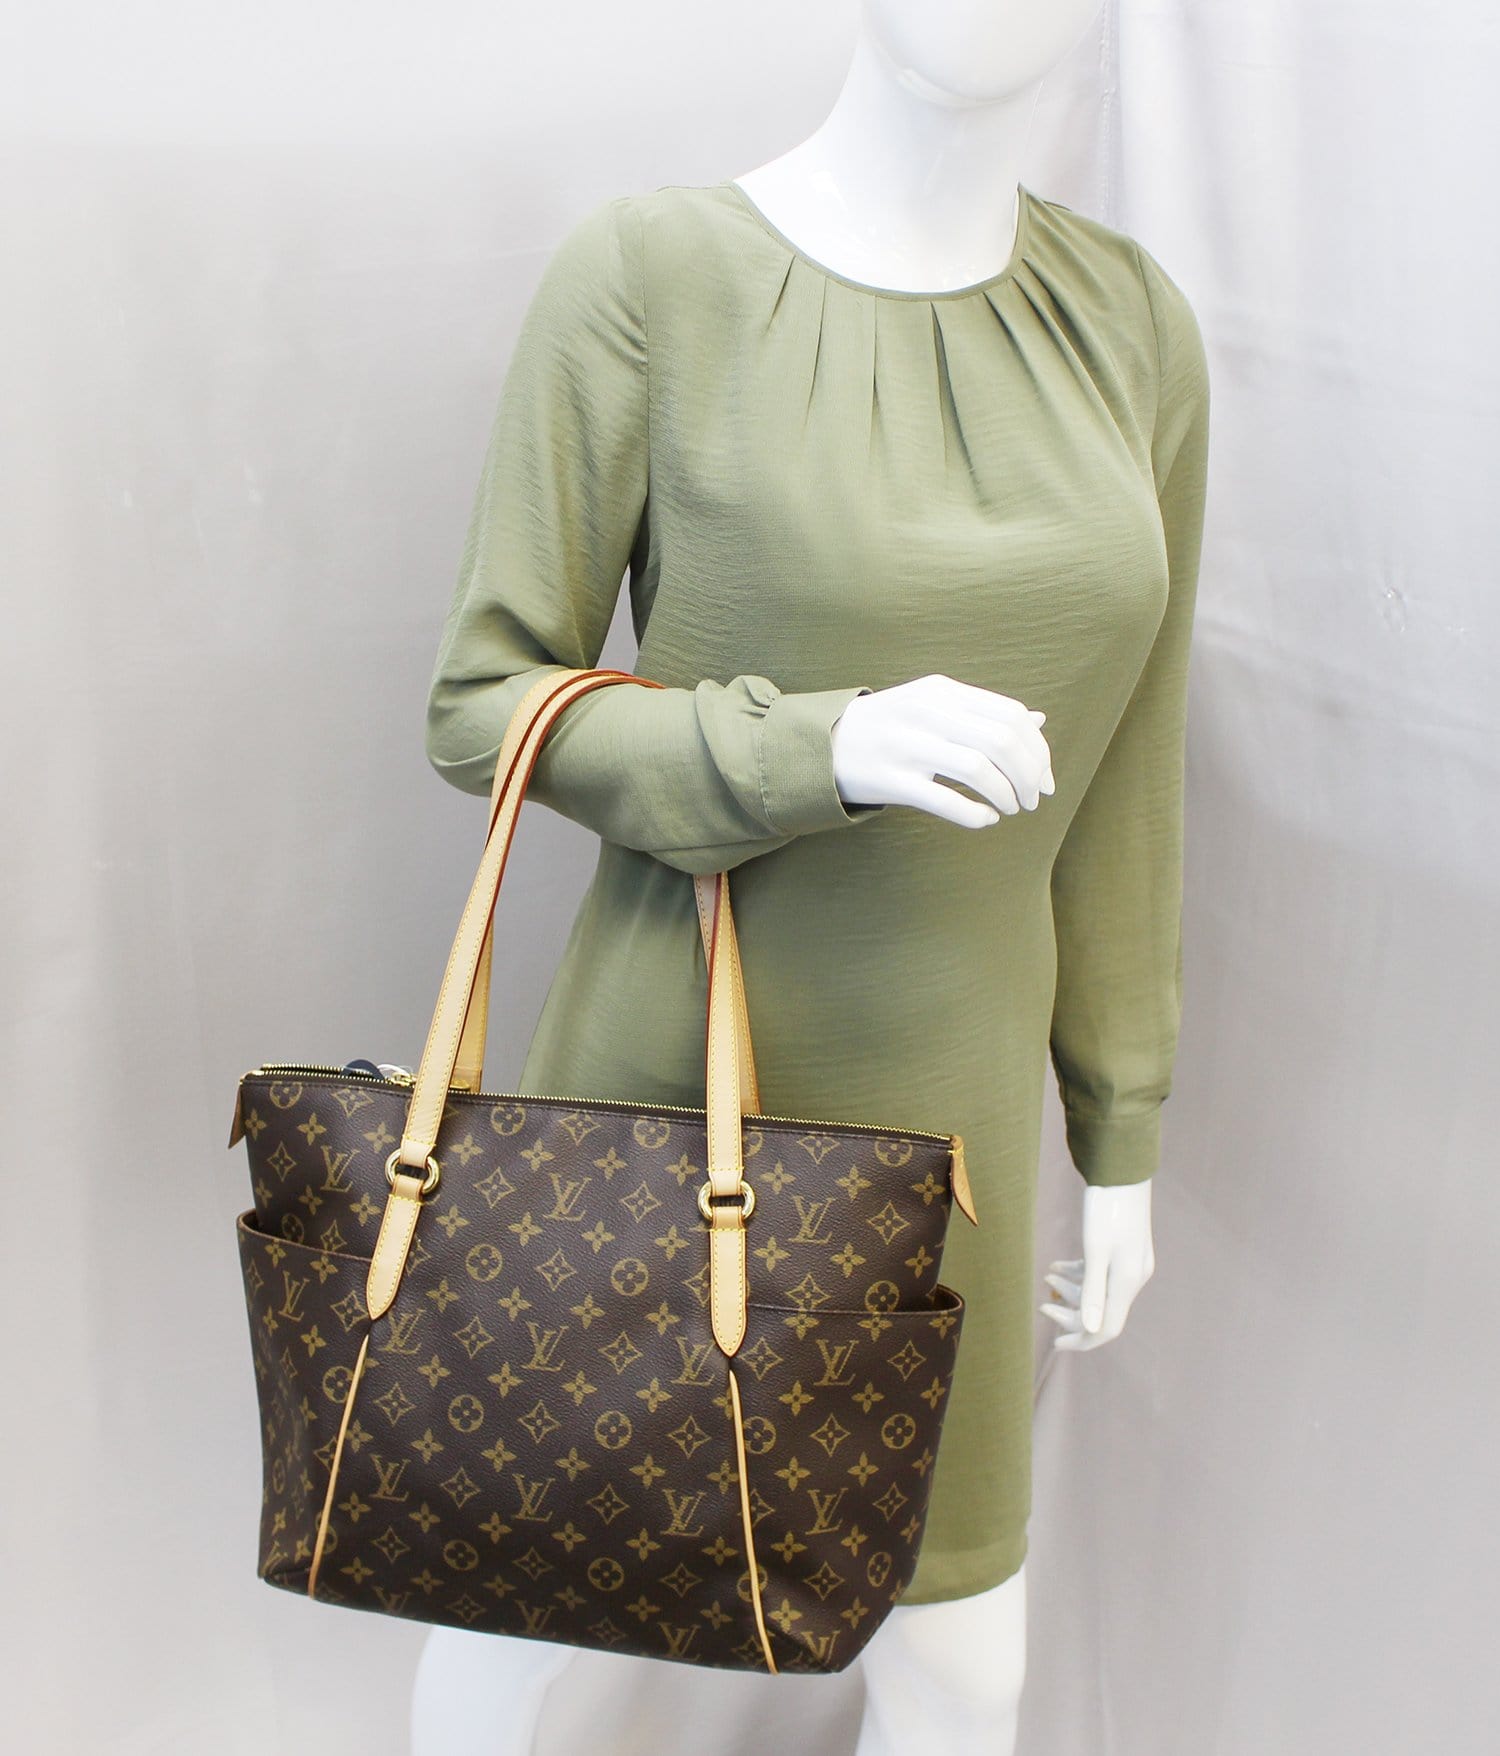 Louis Vuitton, Bags, Louis Vuitton Louis Vuitton Monogram Totally Mm  Brown M56689 Womens Tote Bag